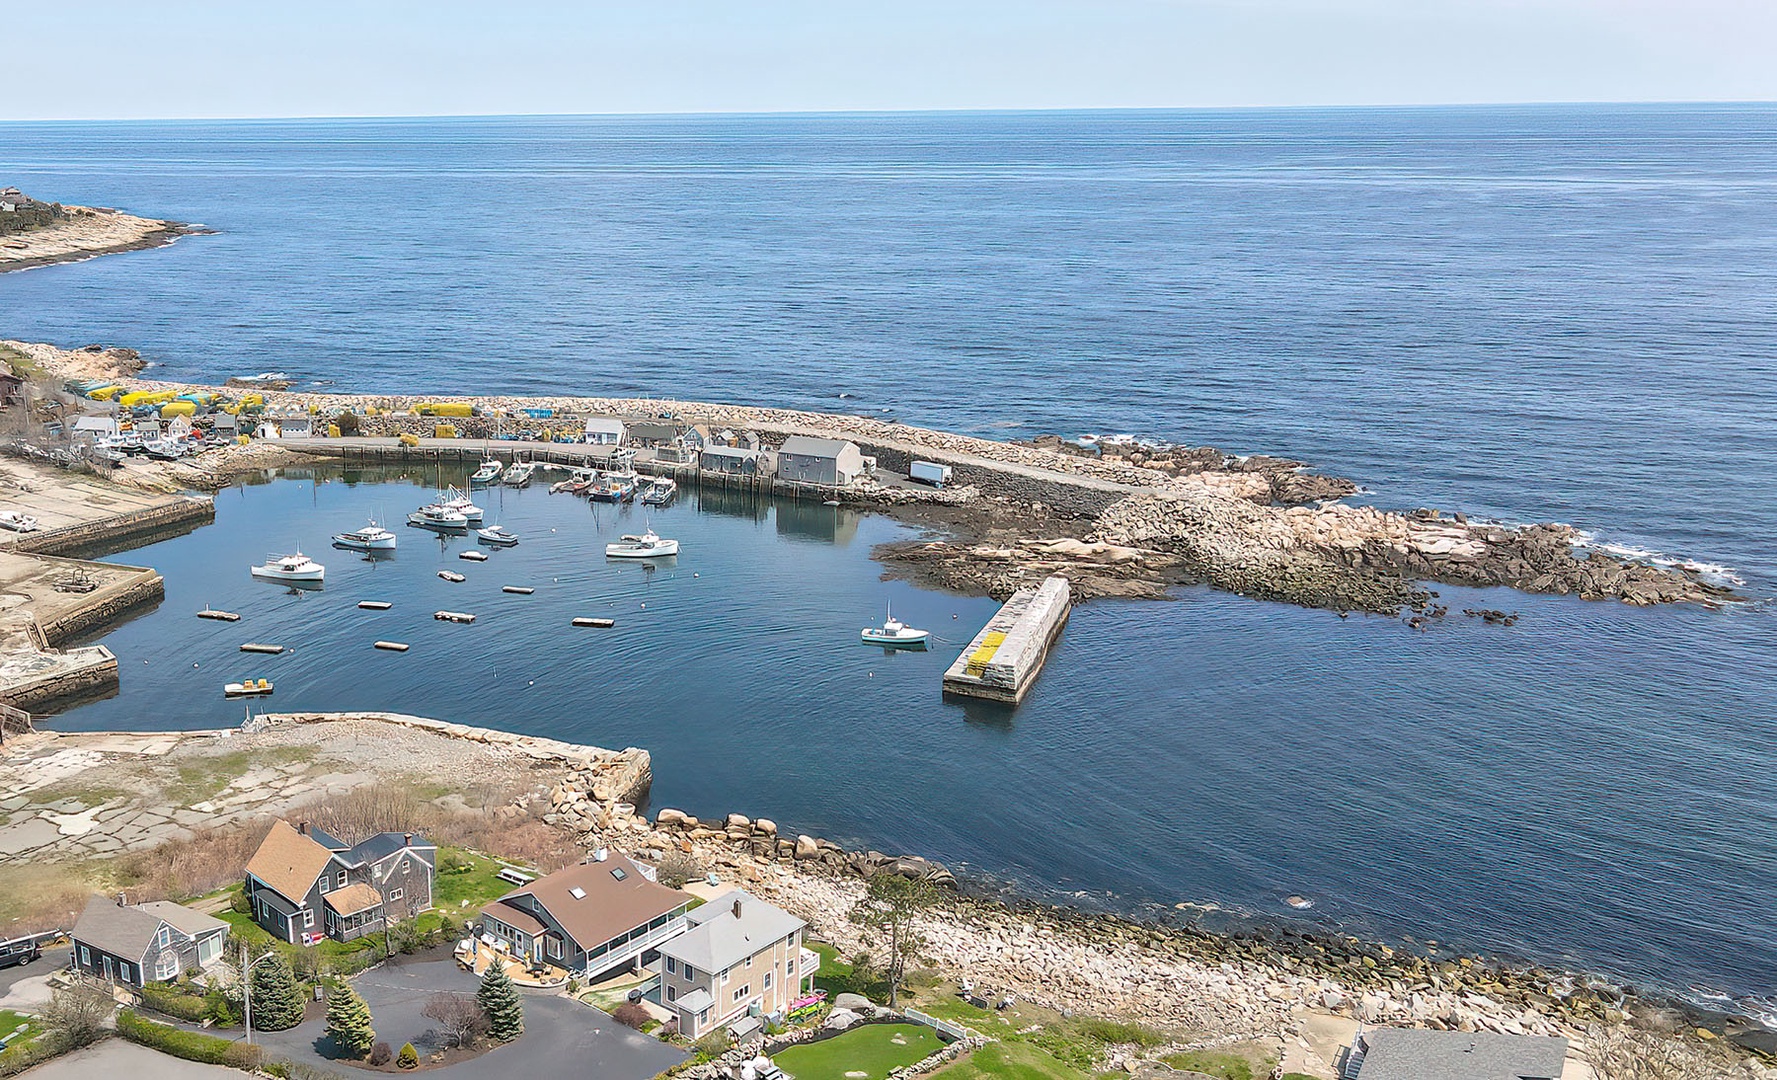 Watch the boats go by in Pigeon Cove.